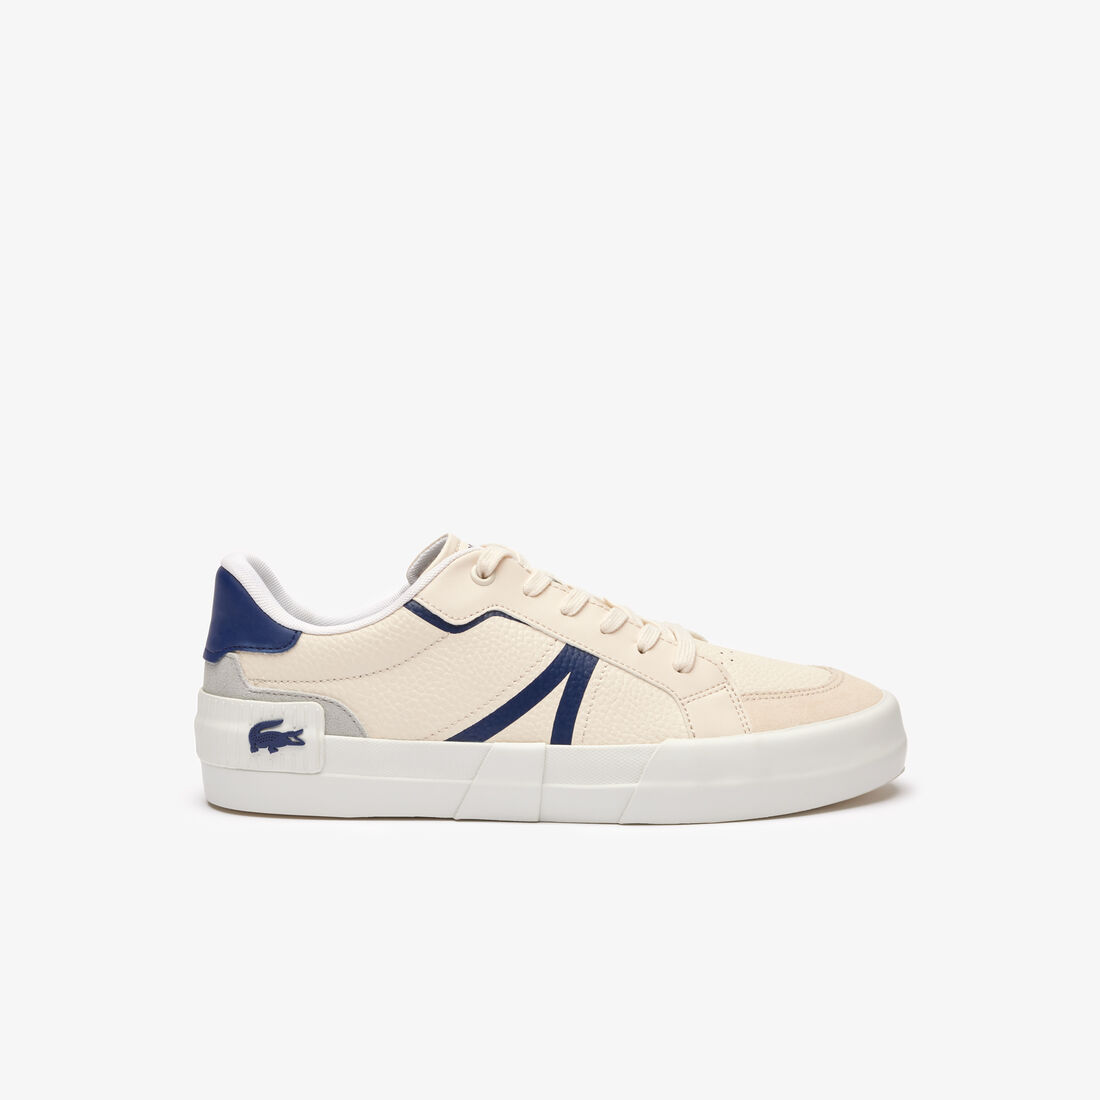 Buy Men's L004 Leather Trainers | Lacoste UAE